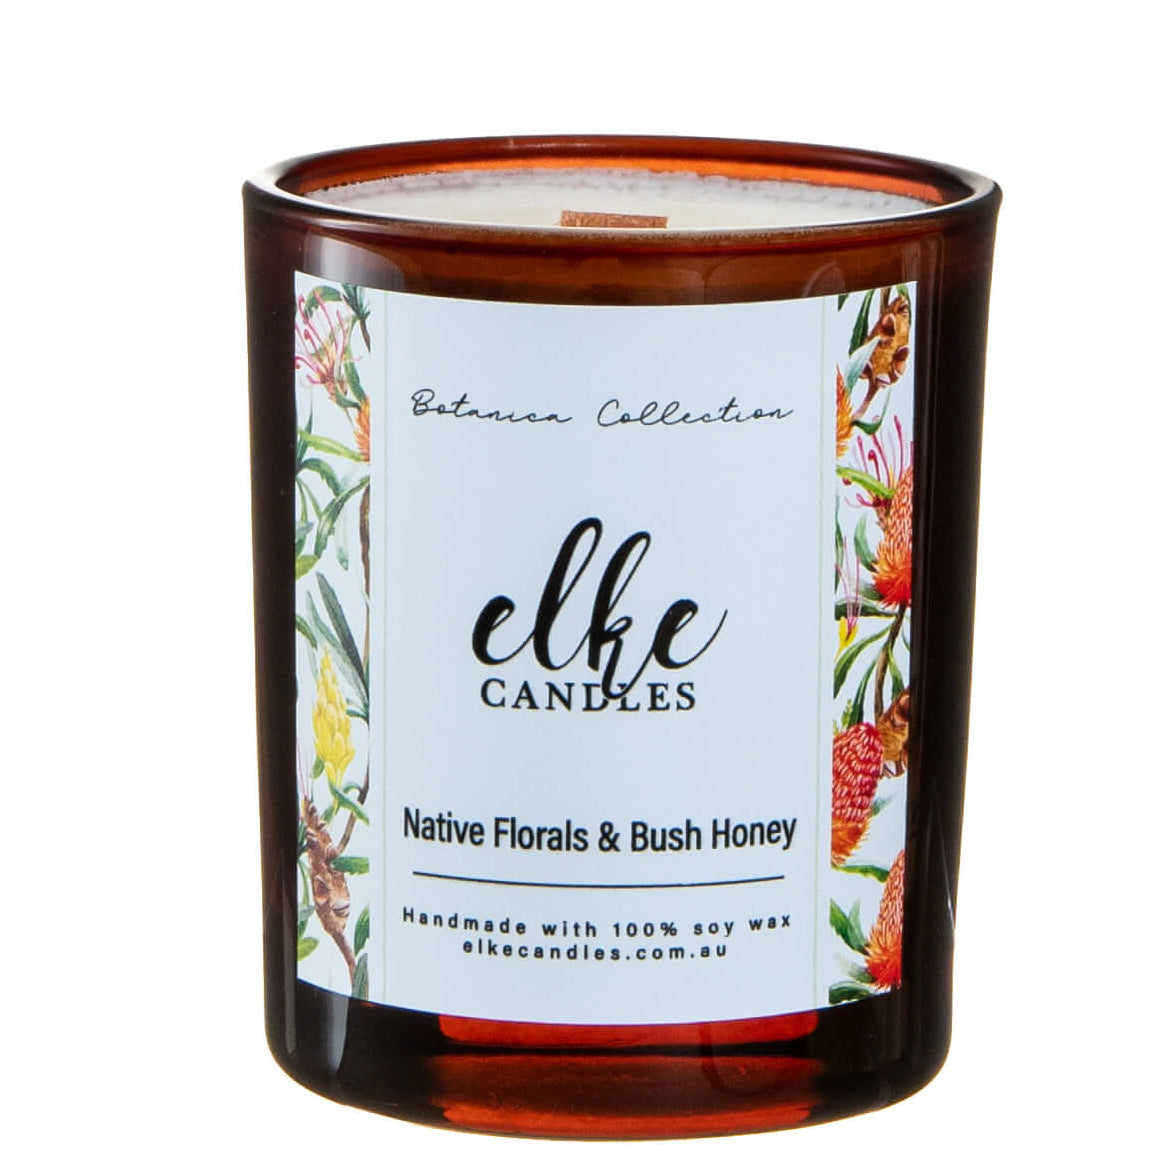 Botanica Collection Petite Soy Candle